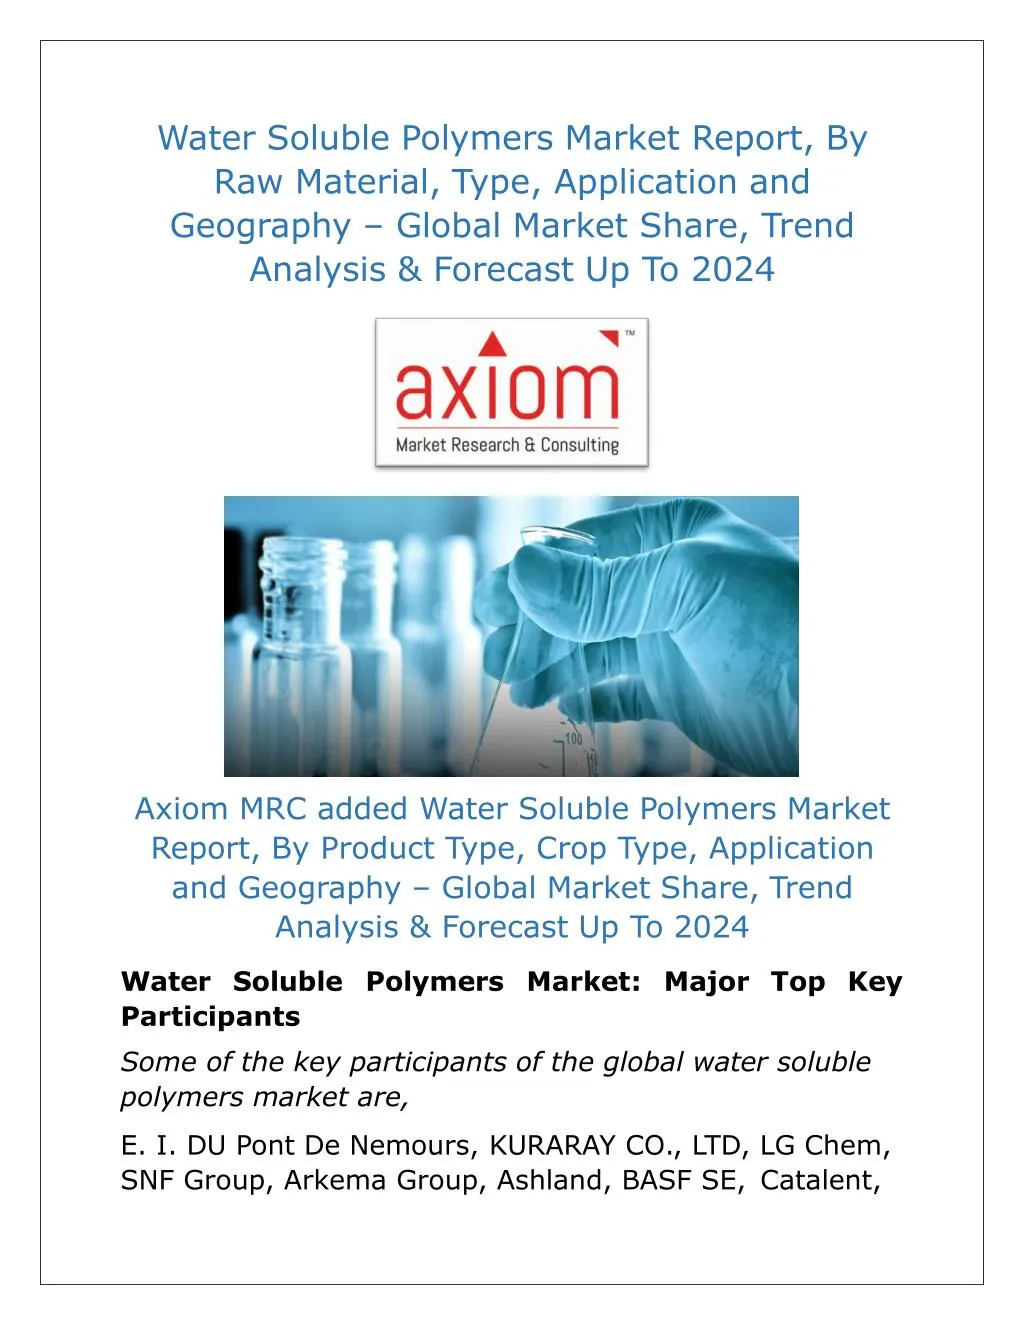 water soluble polymers market report